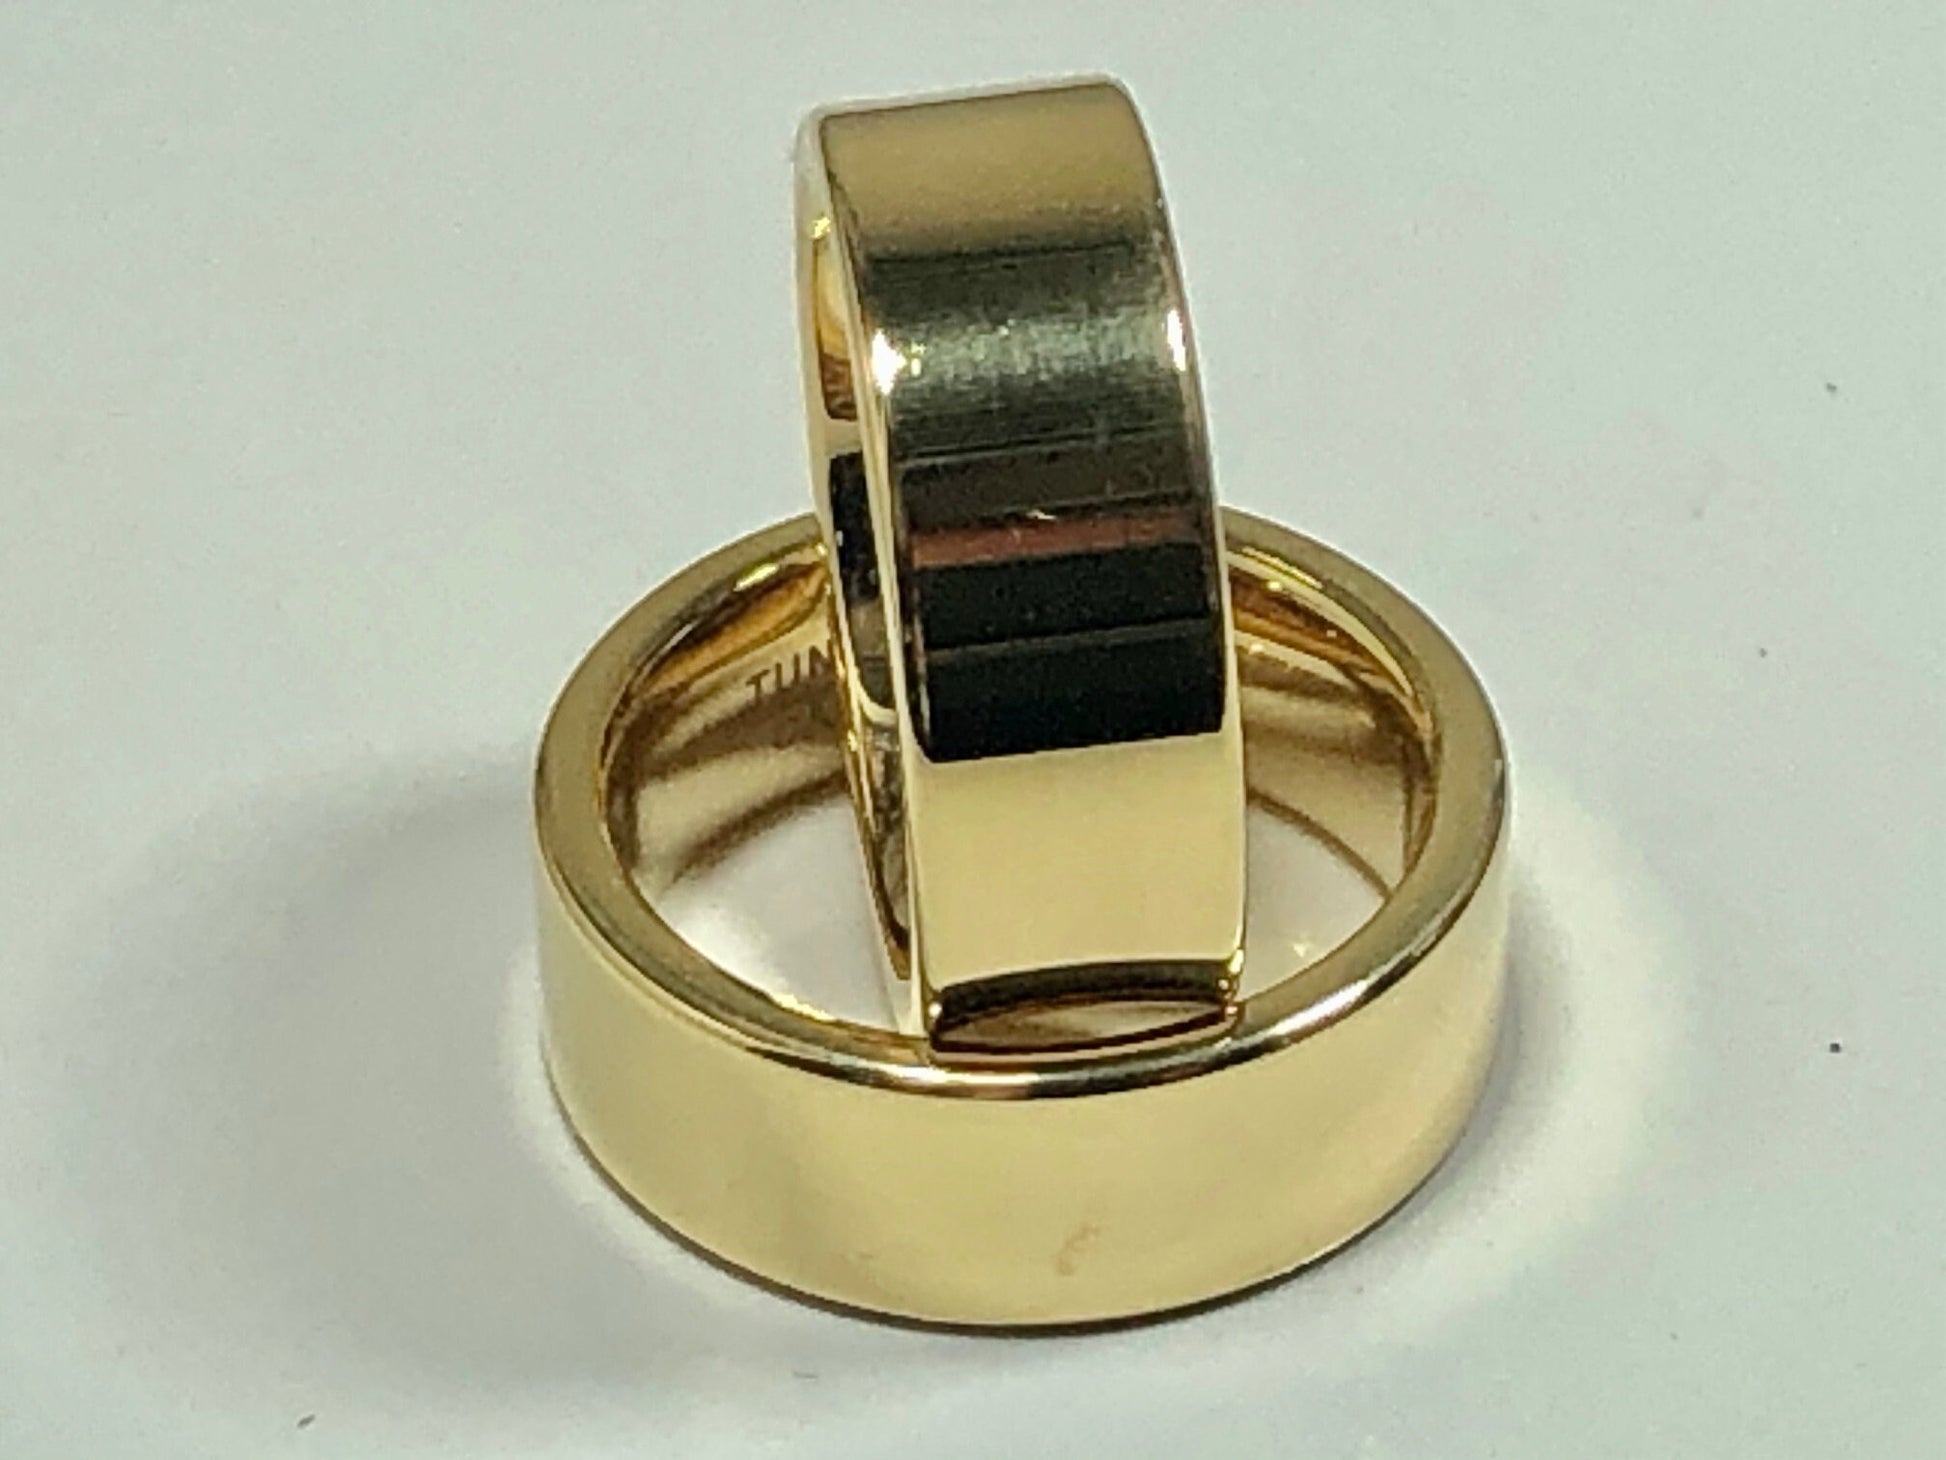 Tungsten Carbide Gold Ring Plated Simple Wedding Band For Men - Anniversary & Wedding - Friendship - Anytime, Best Friend